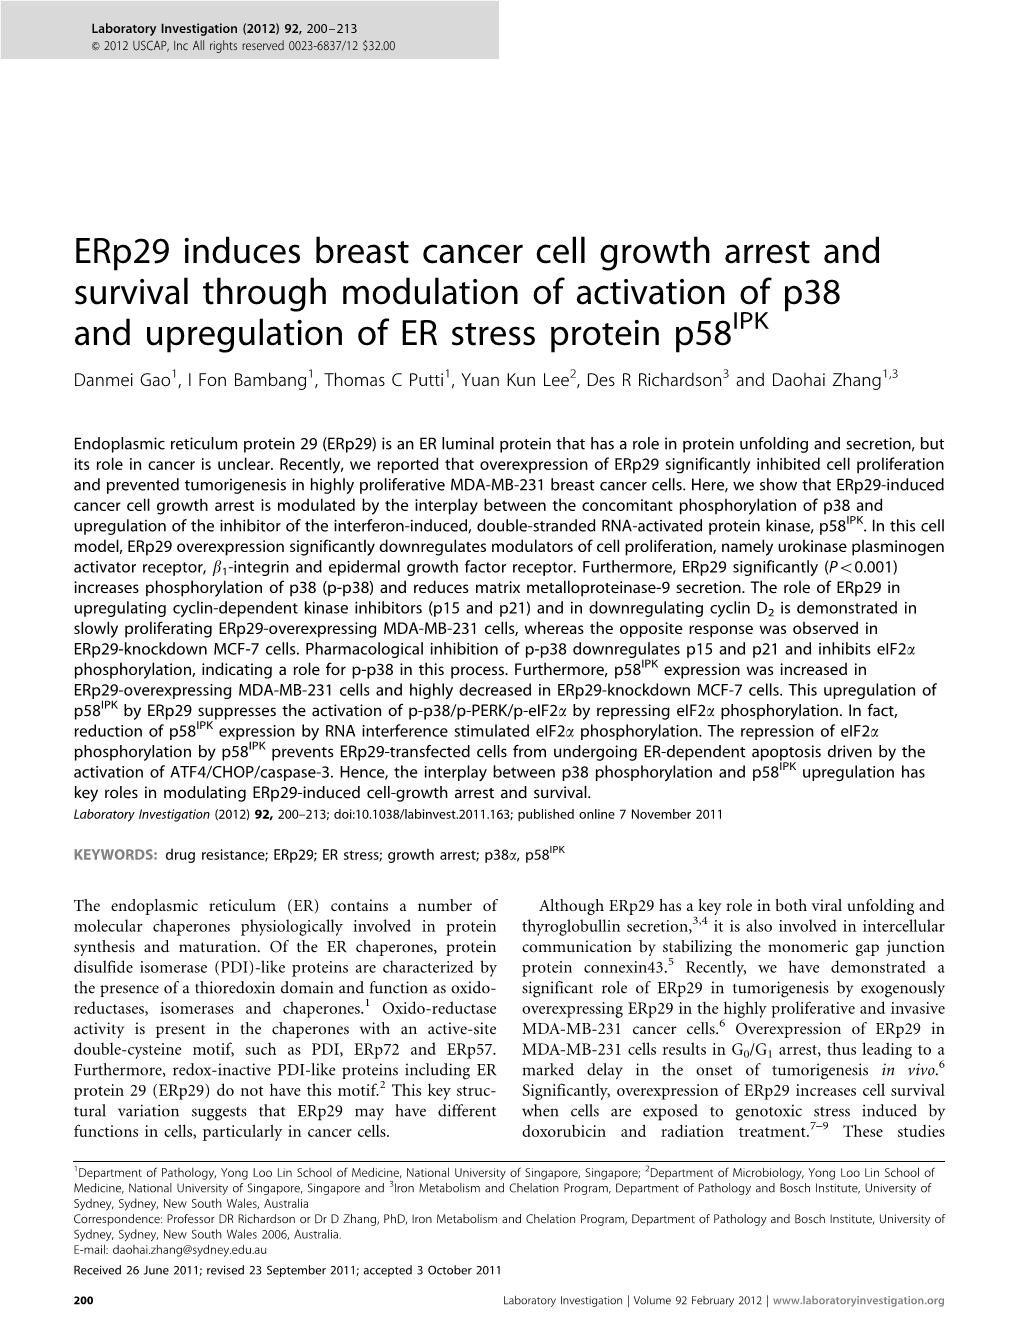 Erp29 Induces Breast Cancer Cell Growth Arrest and Survival